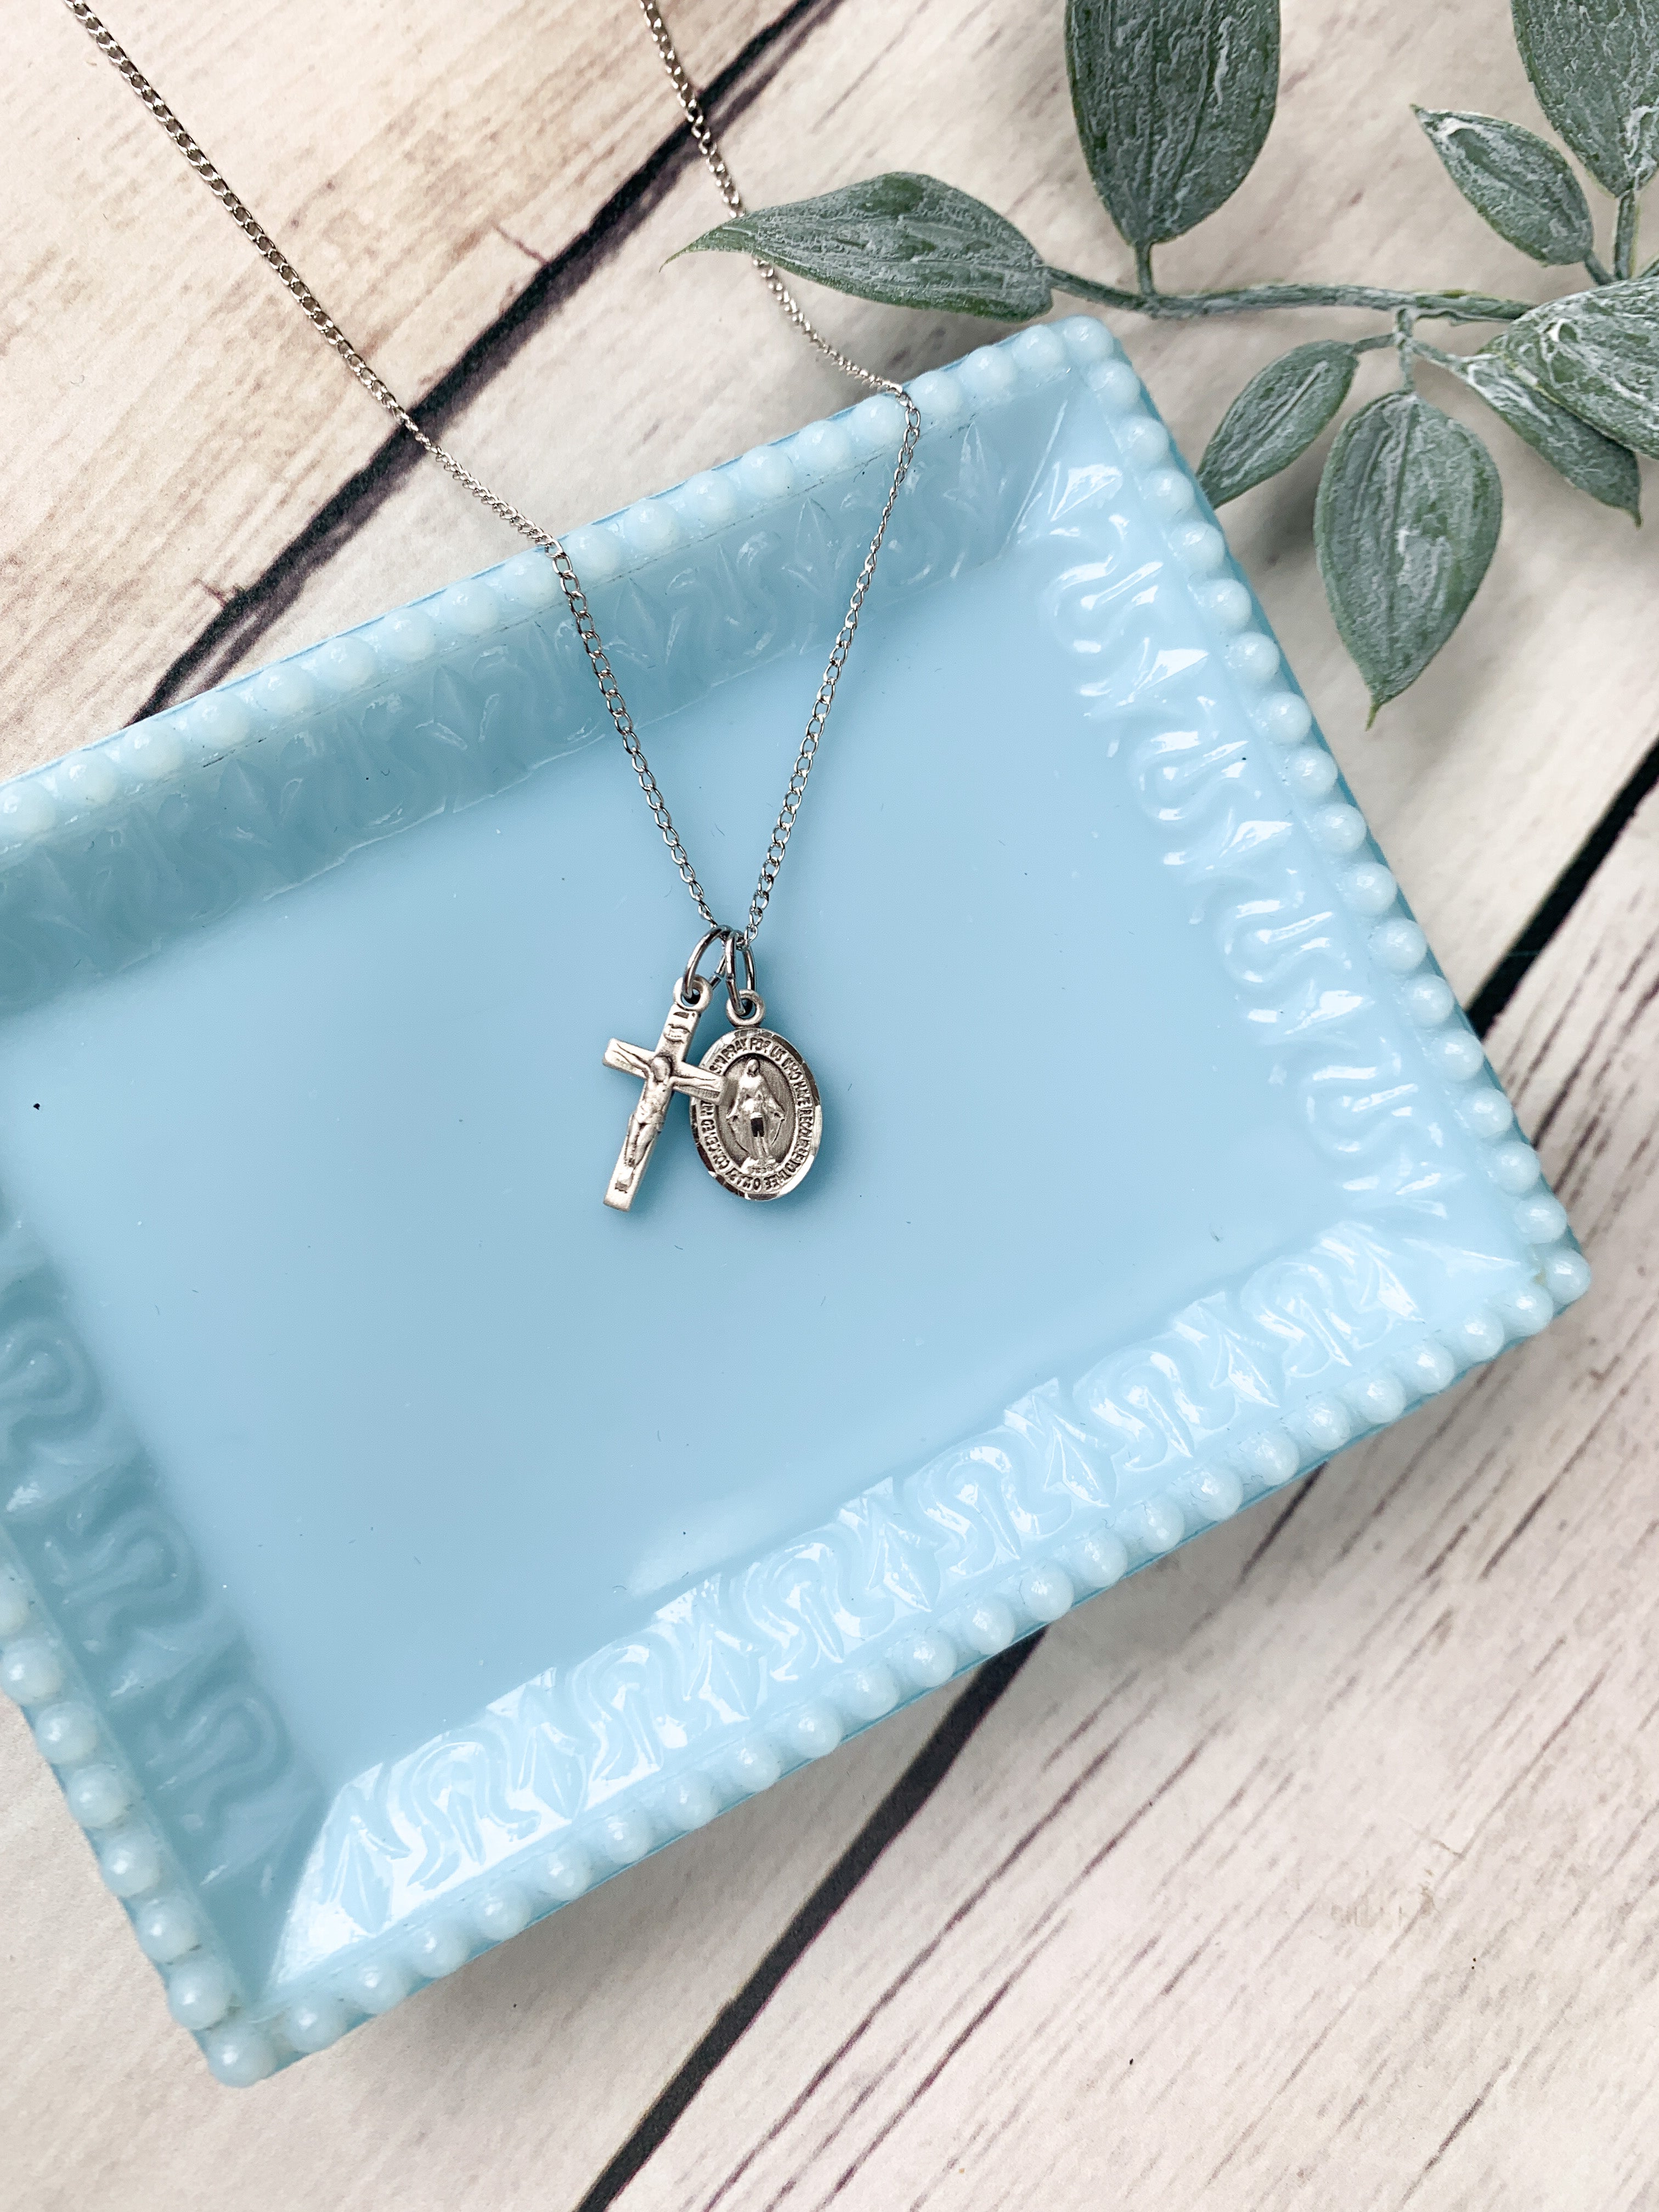 Miraculous Medal Necklace. Stainless Steel Box Chain With Saint Medal and  Crucifix. - Etsy